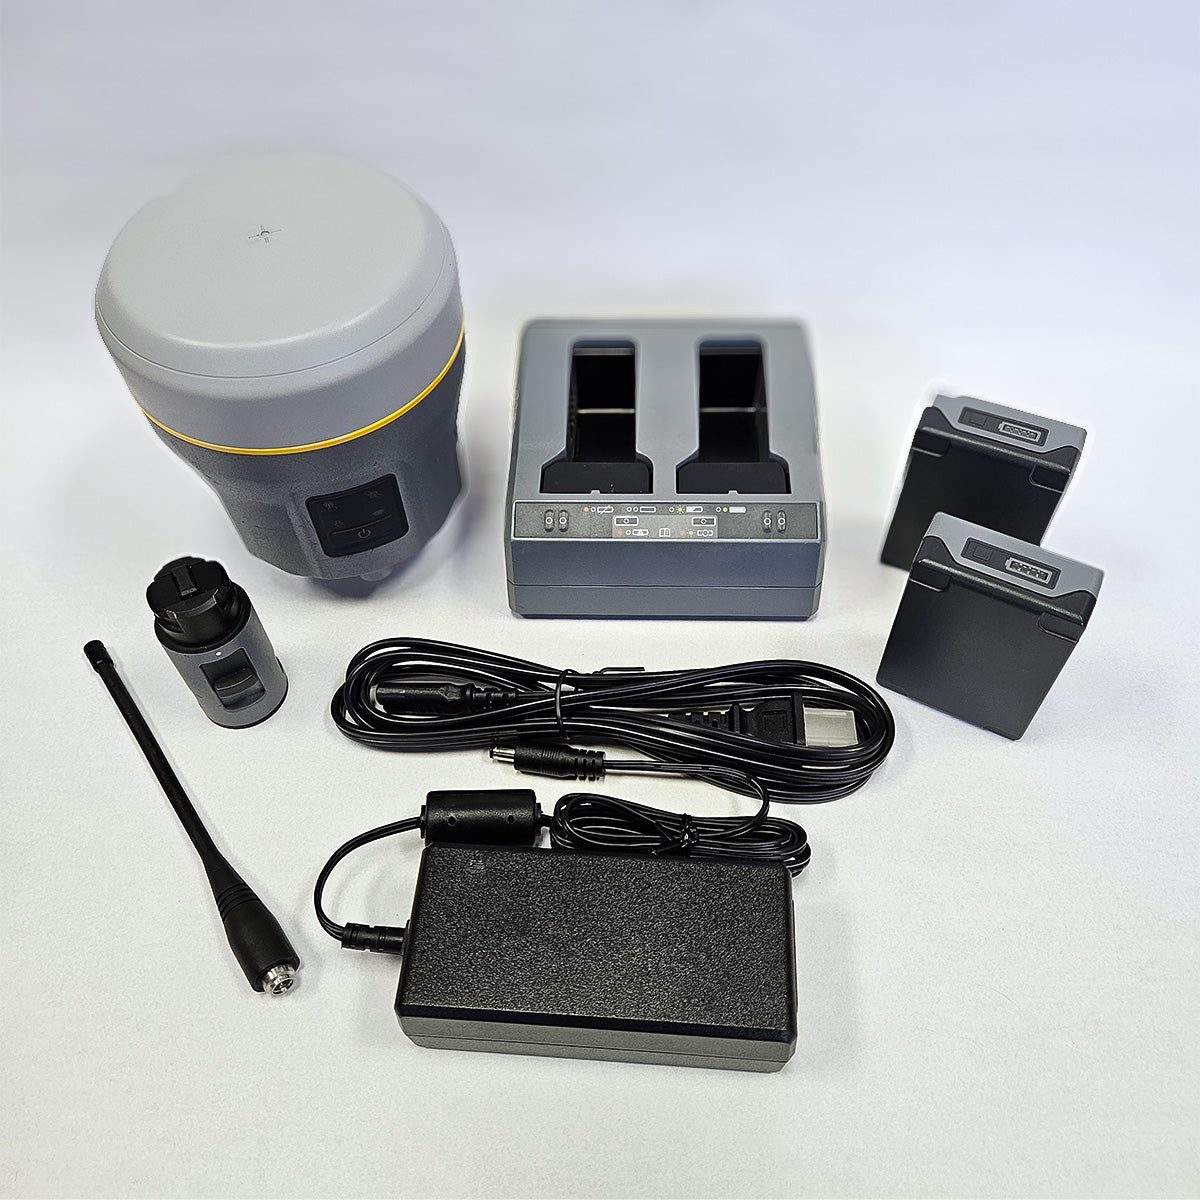 USED Trimble R10, Model 60 GNSS Receiver